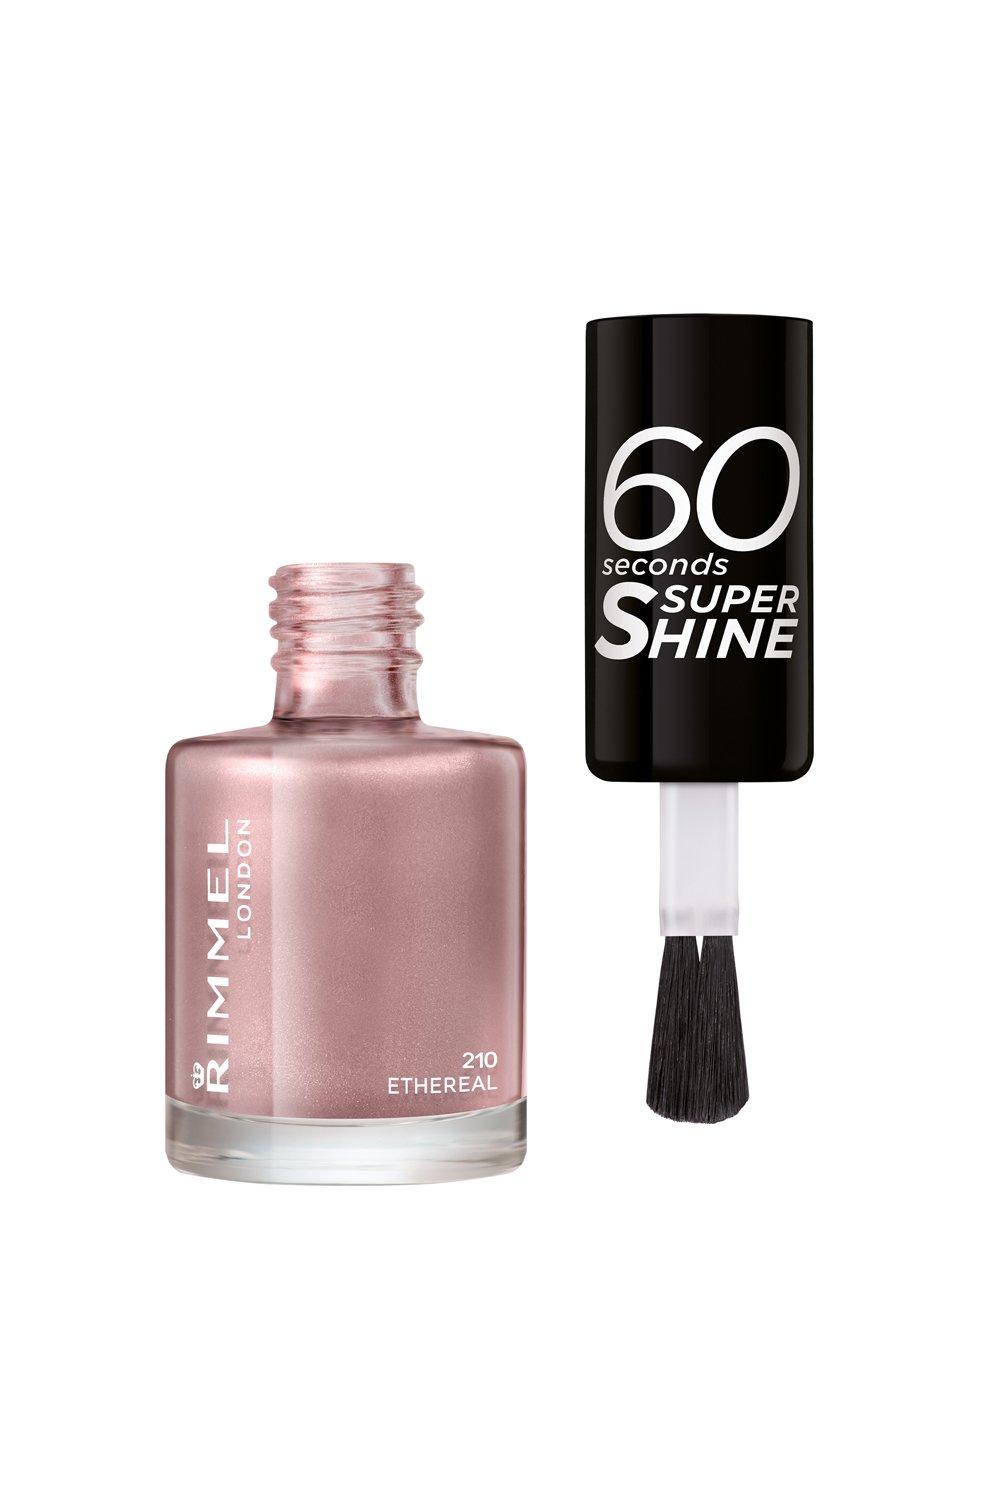 RIMMEL LONDON - 60 Seconds Super Shine Nail Polish Set - Super Glossy, Ultra  Shiny Finish - Precise One Stroke Application - Up To 10 Days Wear - High  Impact Colour - 12 Assorted Shades : : Beauty